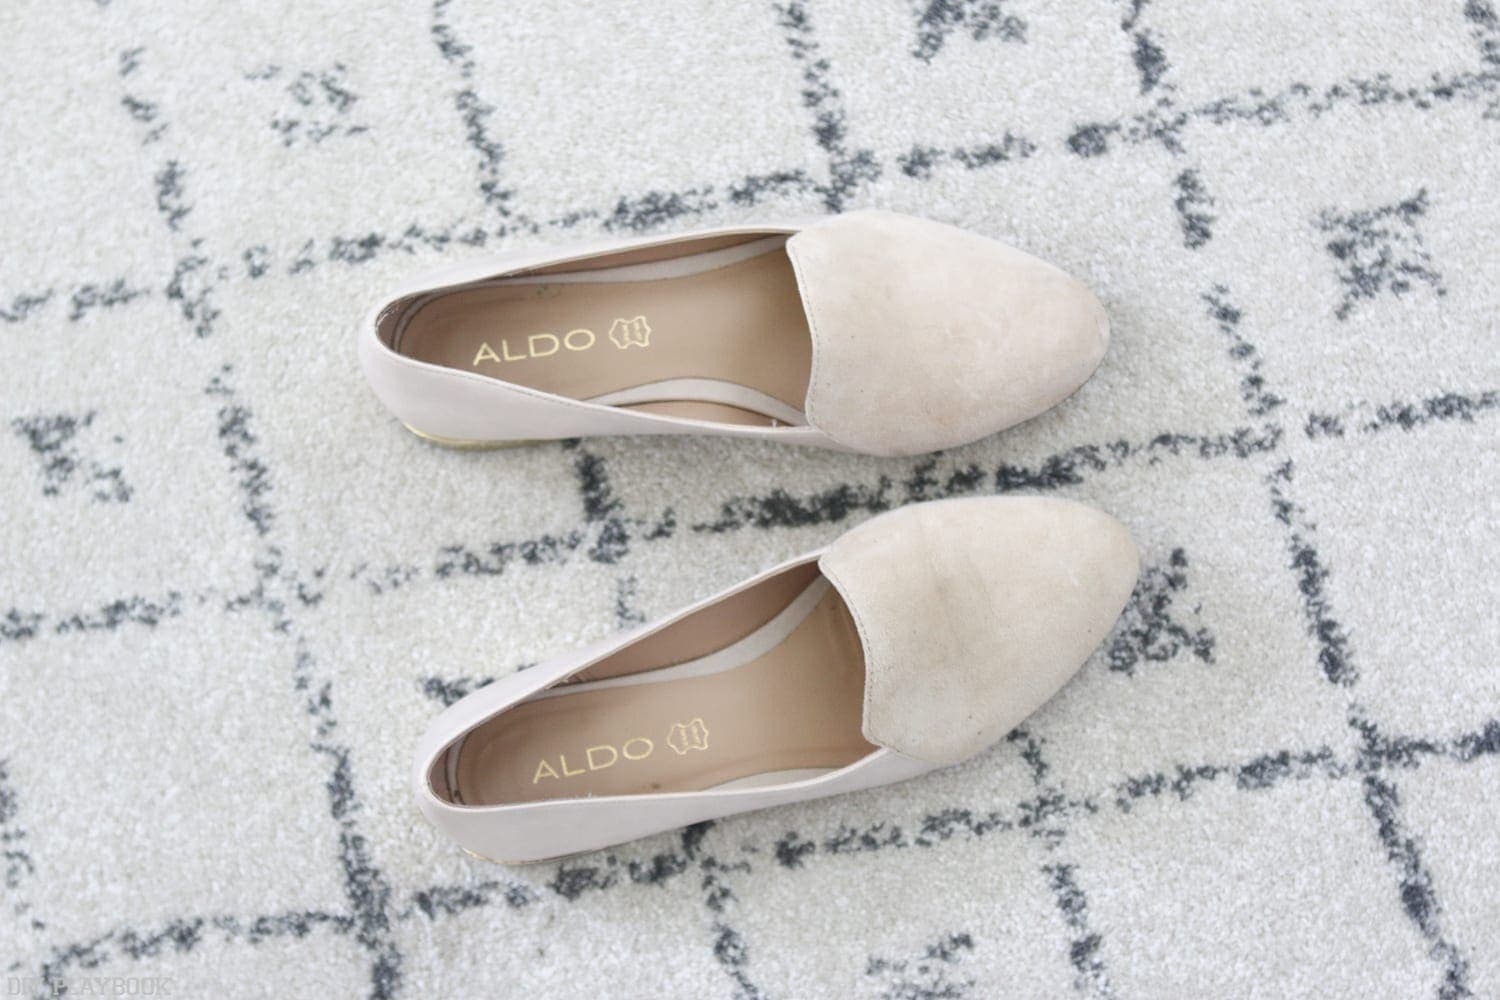 Beige Flats from Aldo: Work Flats & Weekend Flats: Review & Buying Guide | DIY Playbook